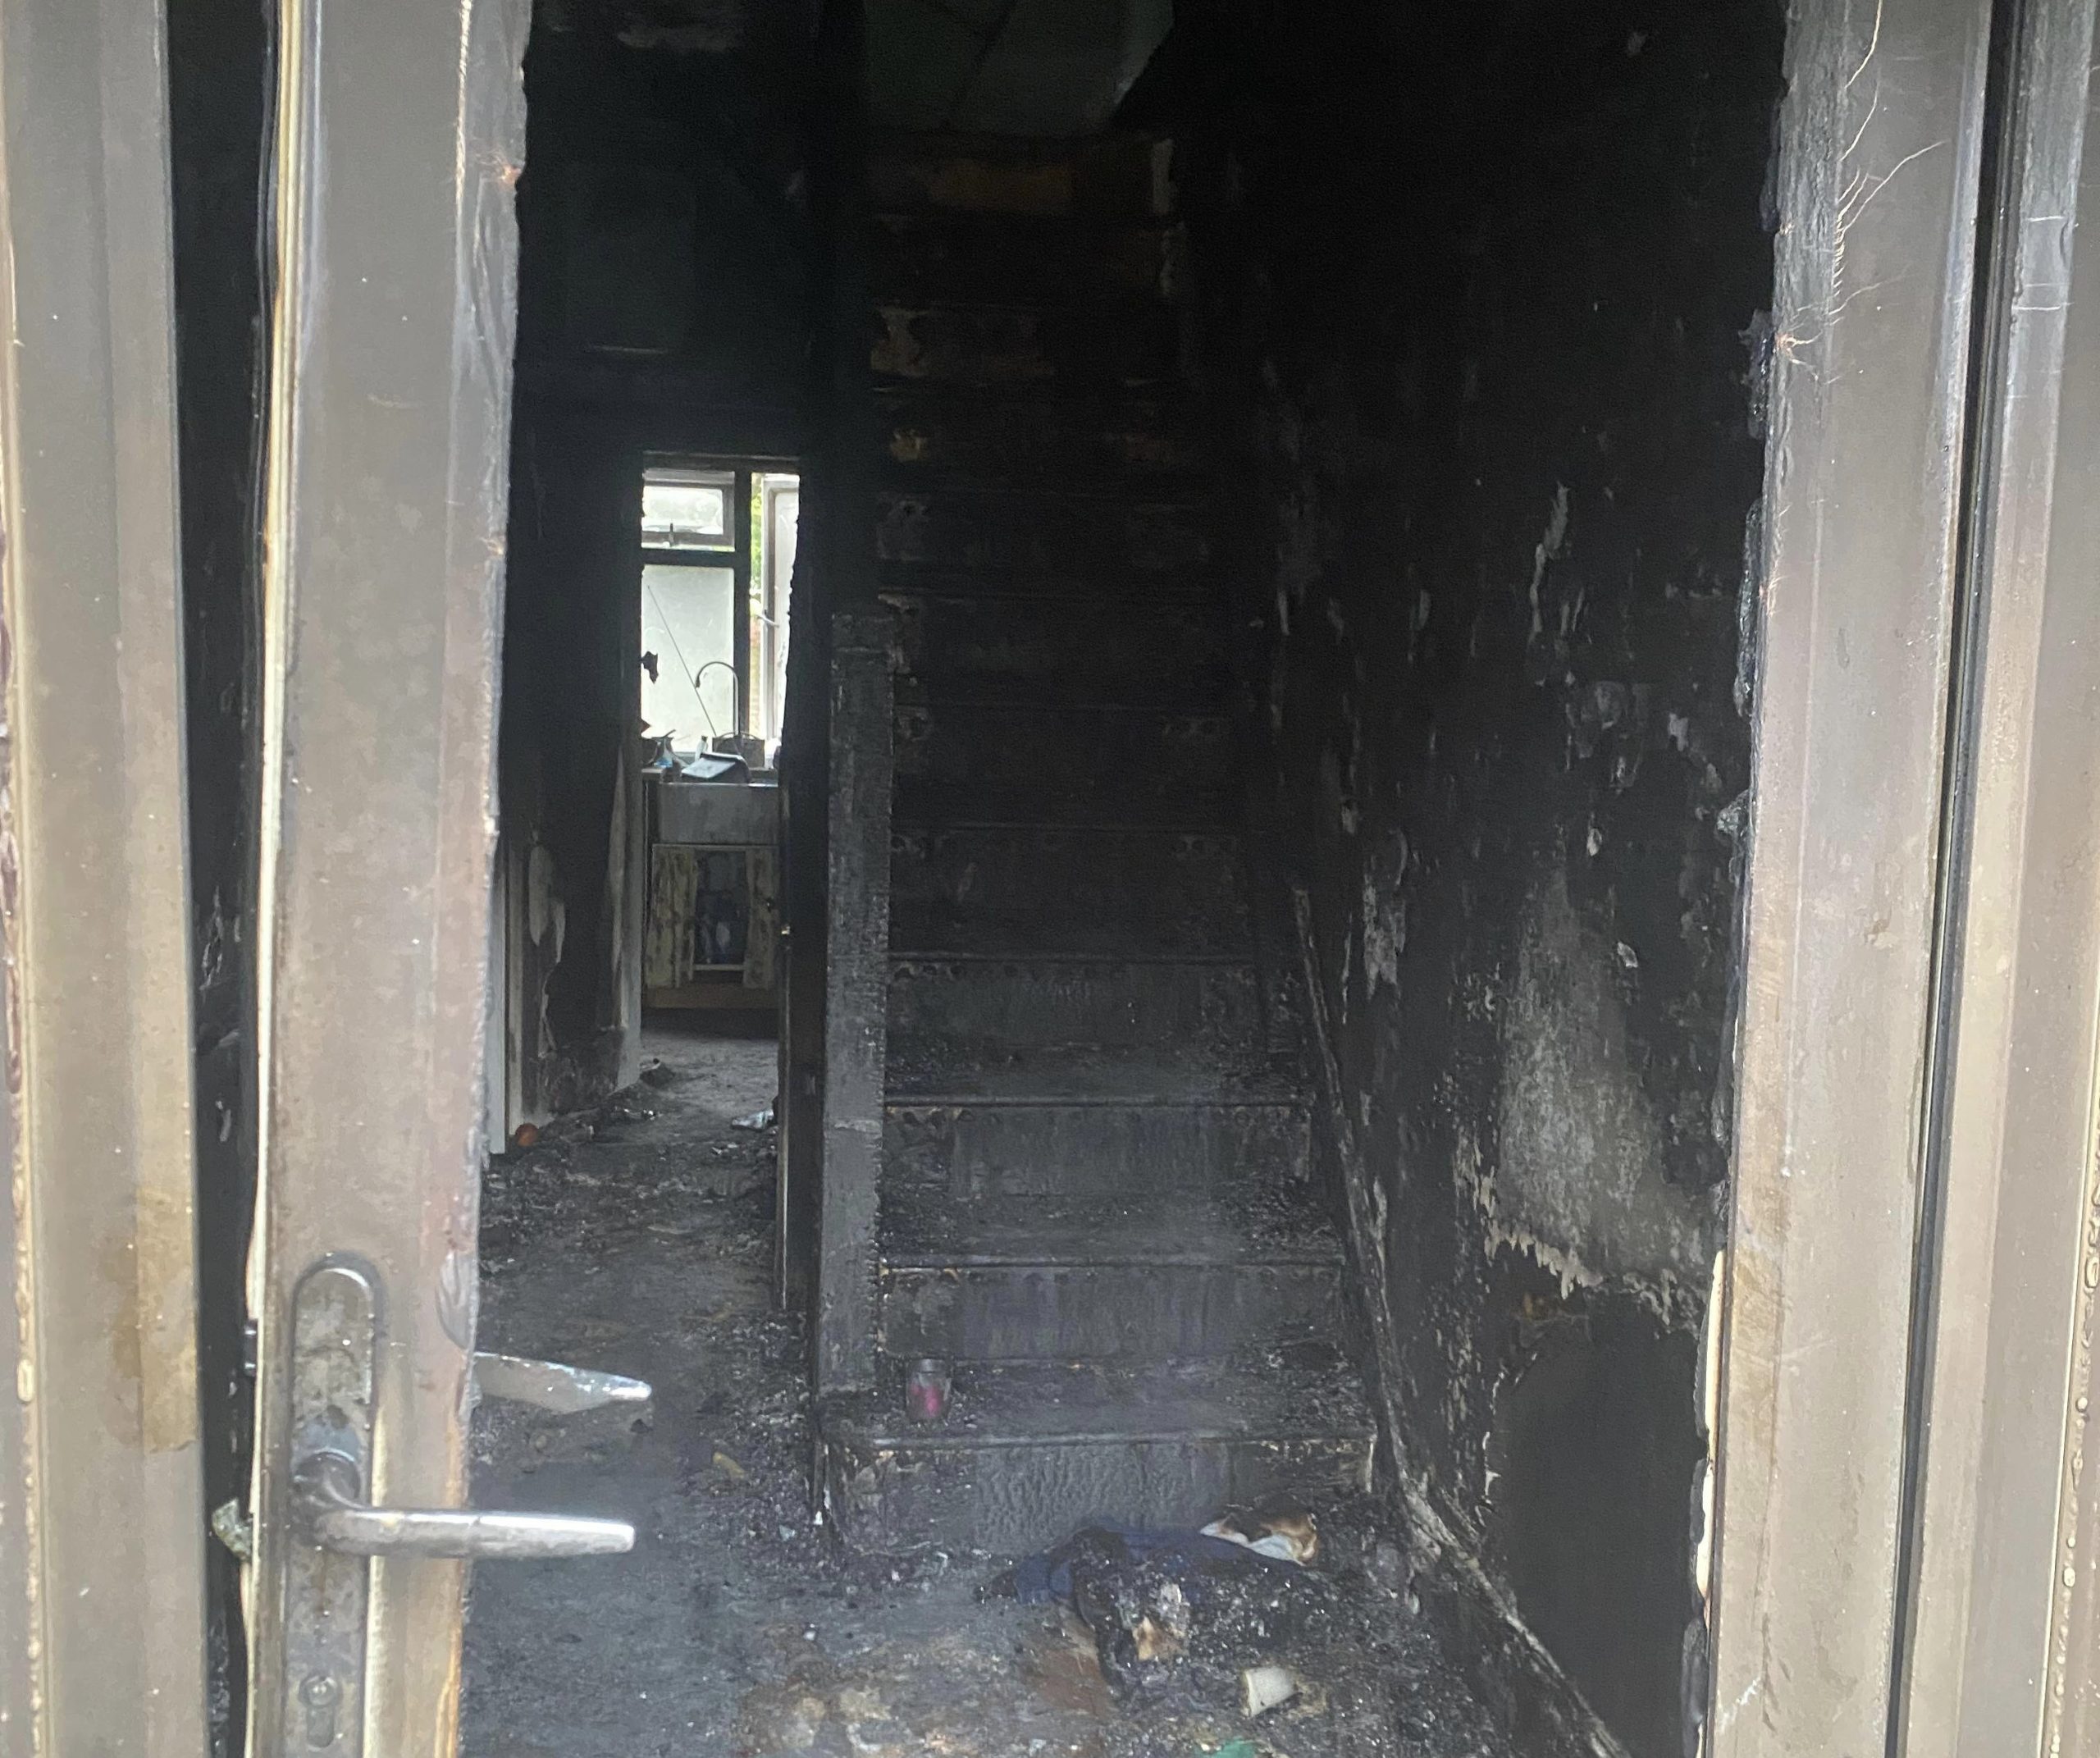 NEWS | Family left devastated after severe fire causes major damage to property in Hereford